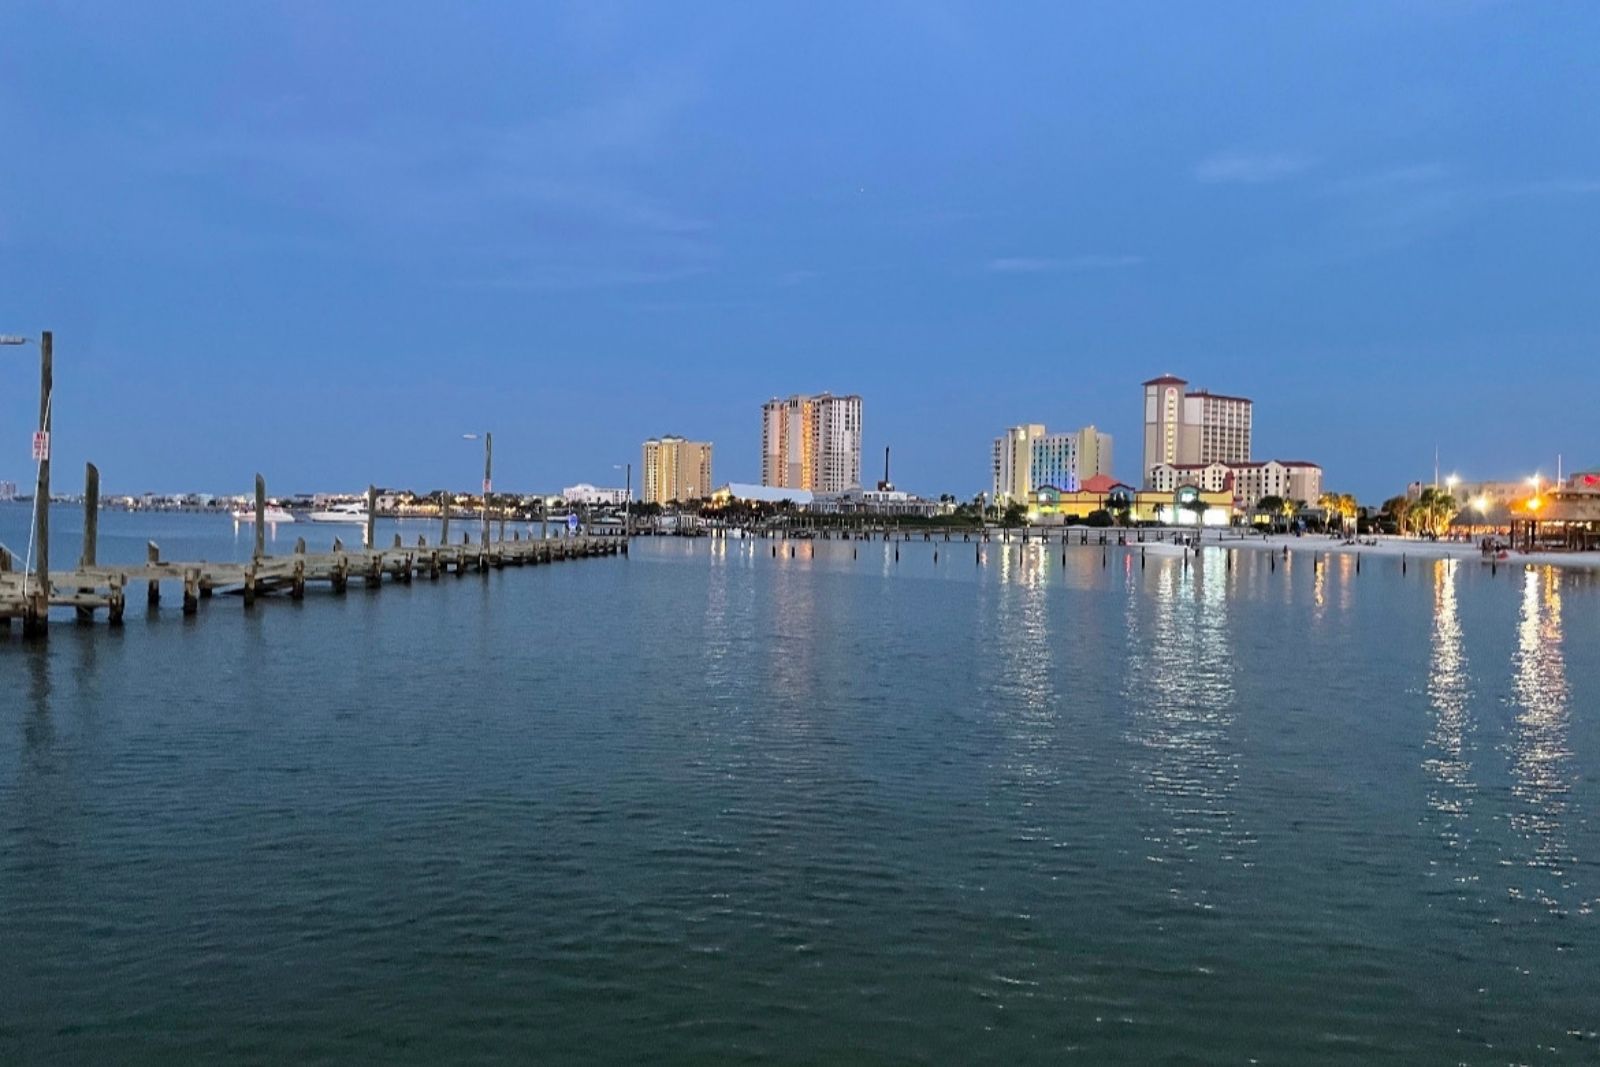 Step onto the dock at the Pensacola Beach Boardwalk for some amazing views